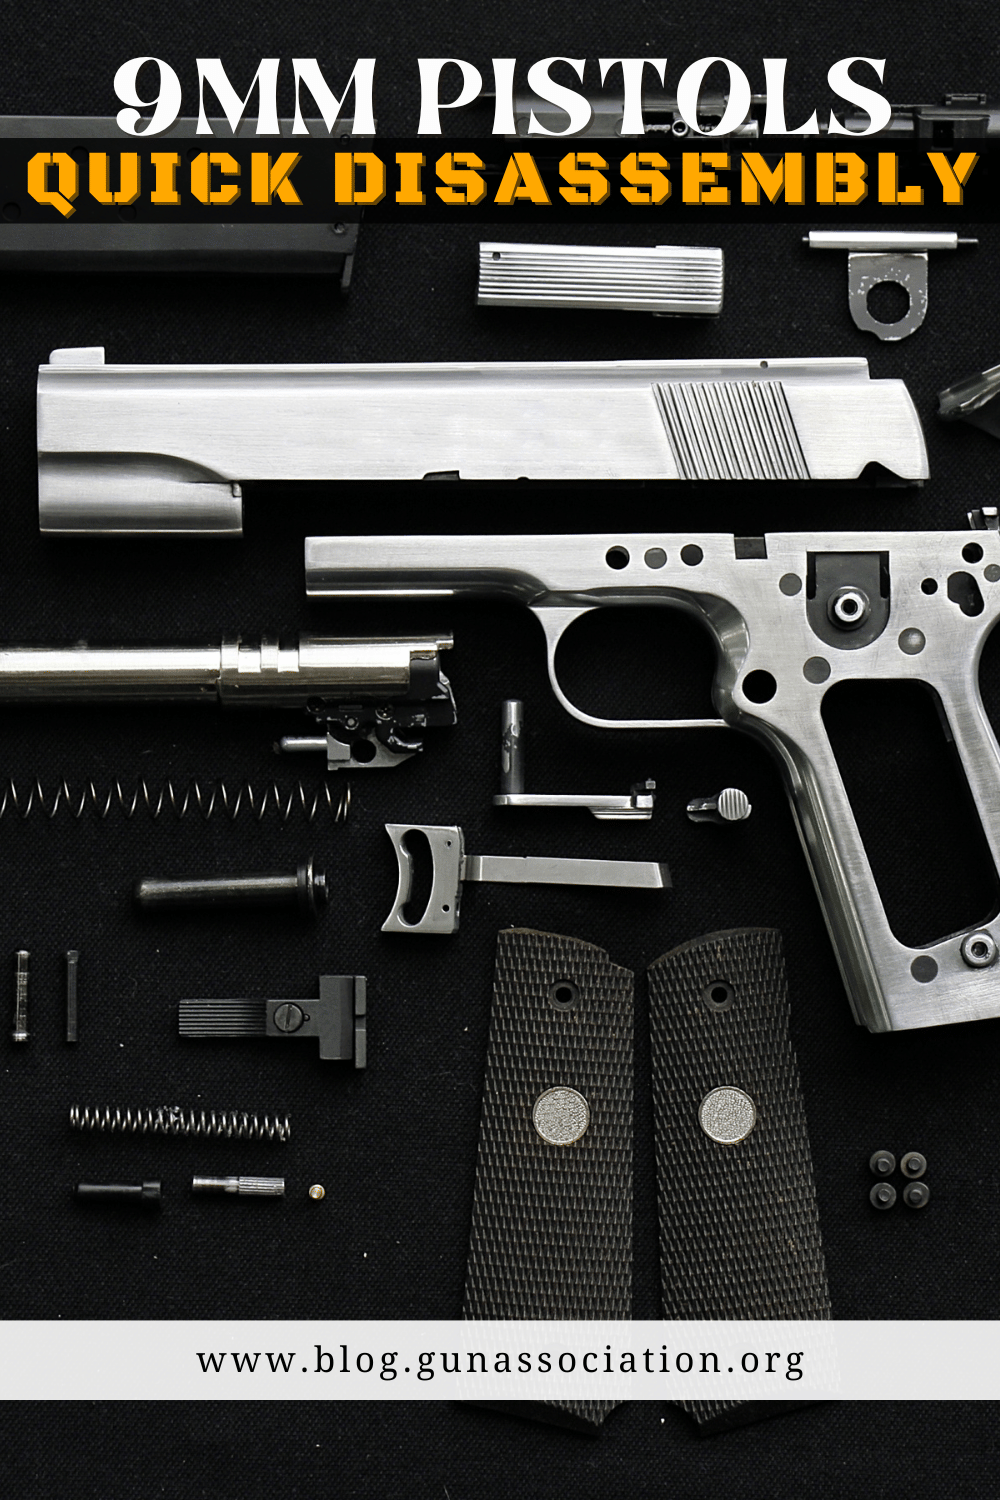 9mm pistols with quick disassembly